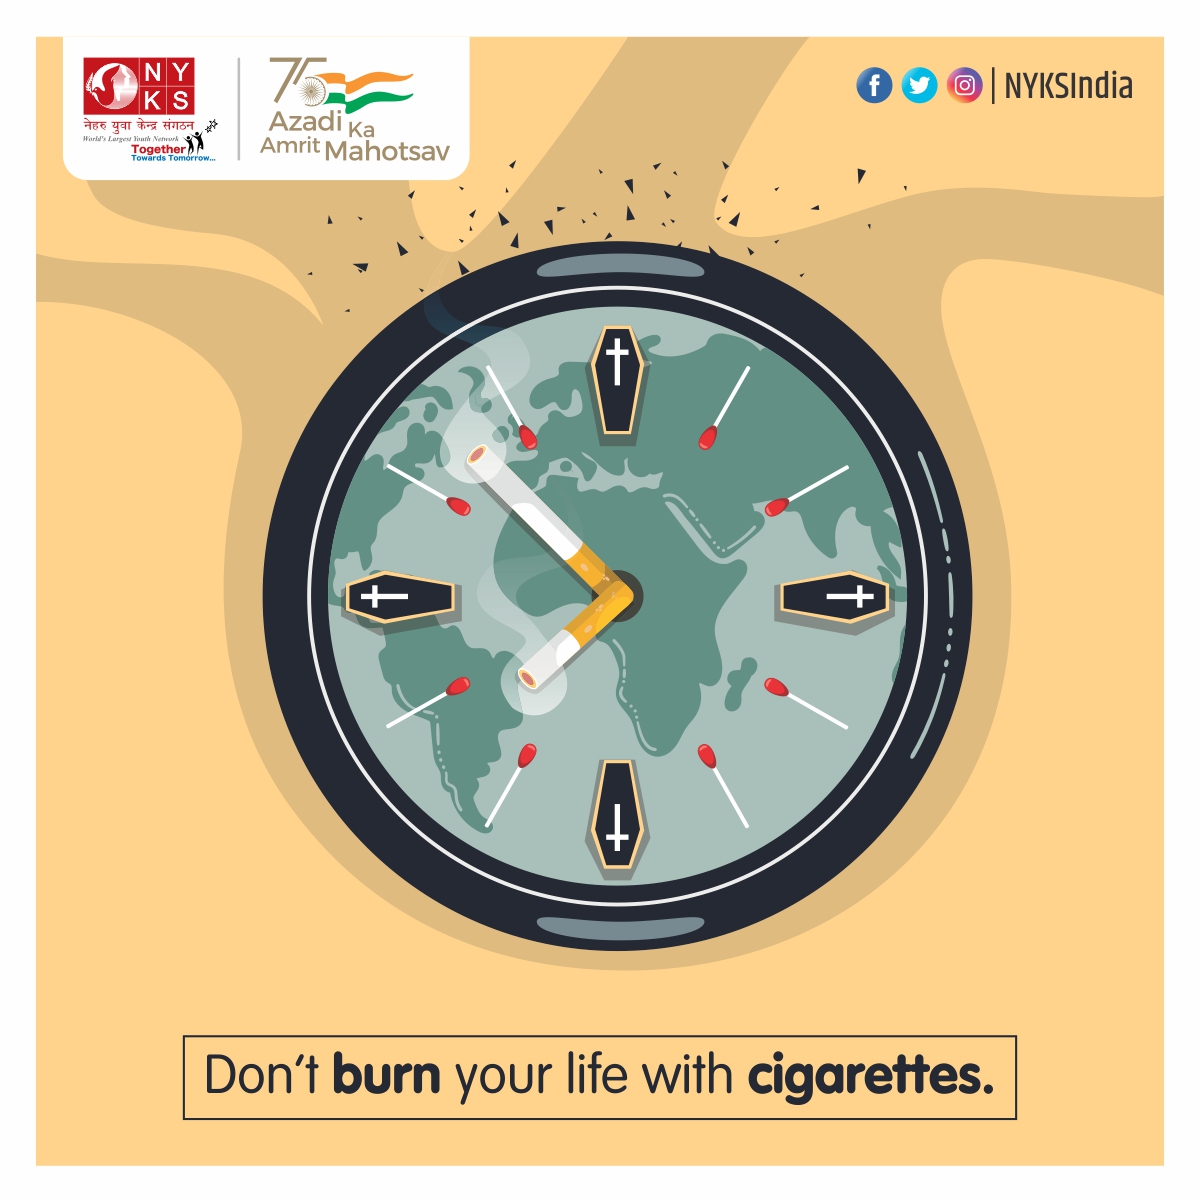 Don’t let the ashes of cigarettes burn your life! Be wise, choose good health, do not litter it with the tobacco. #nosmoking #quitsmoking #smokefree #stopsmoking #health #lifestyle